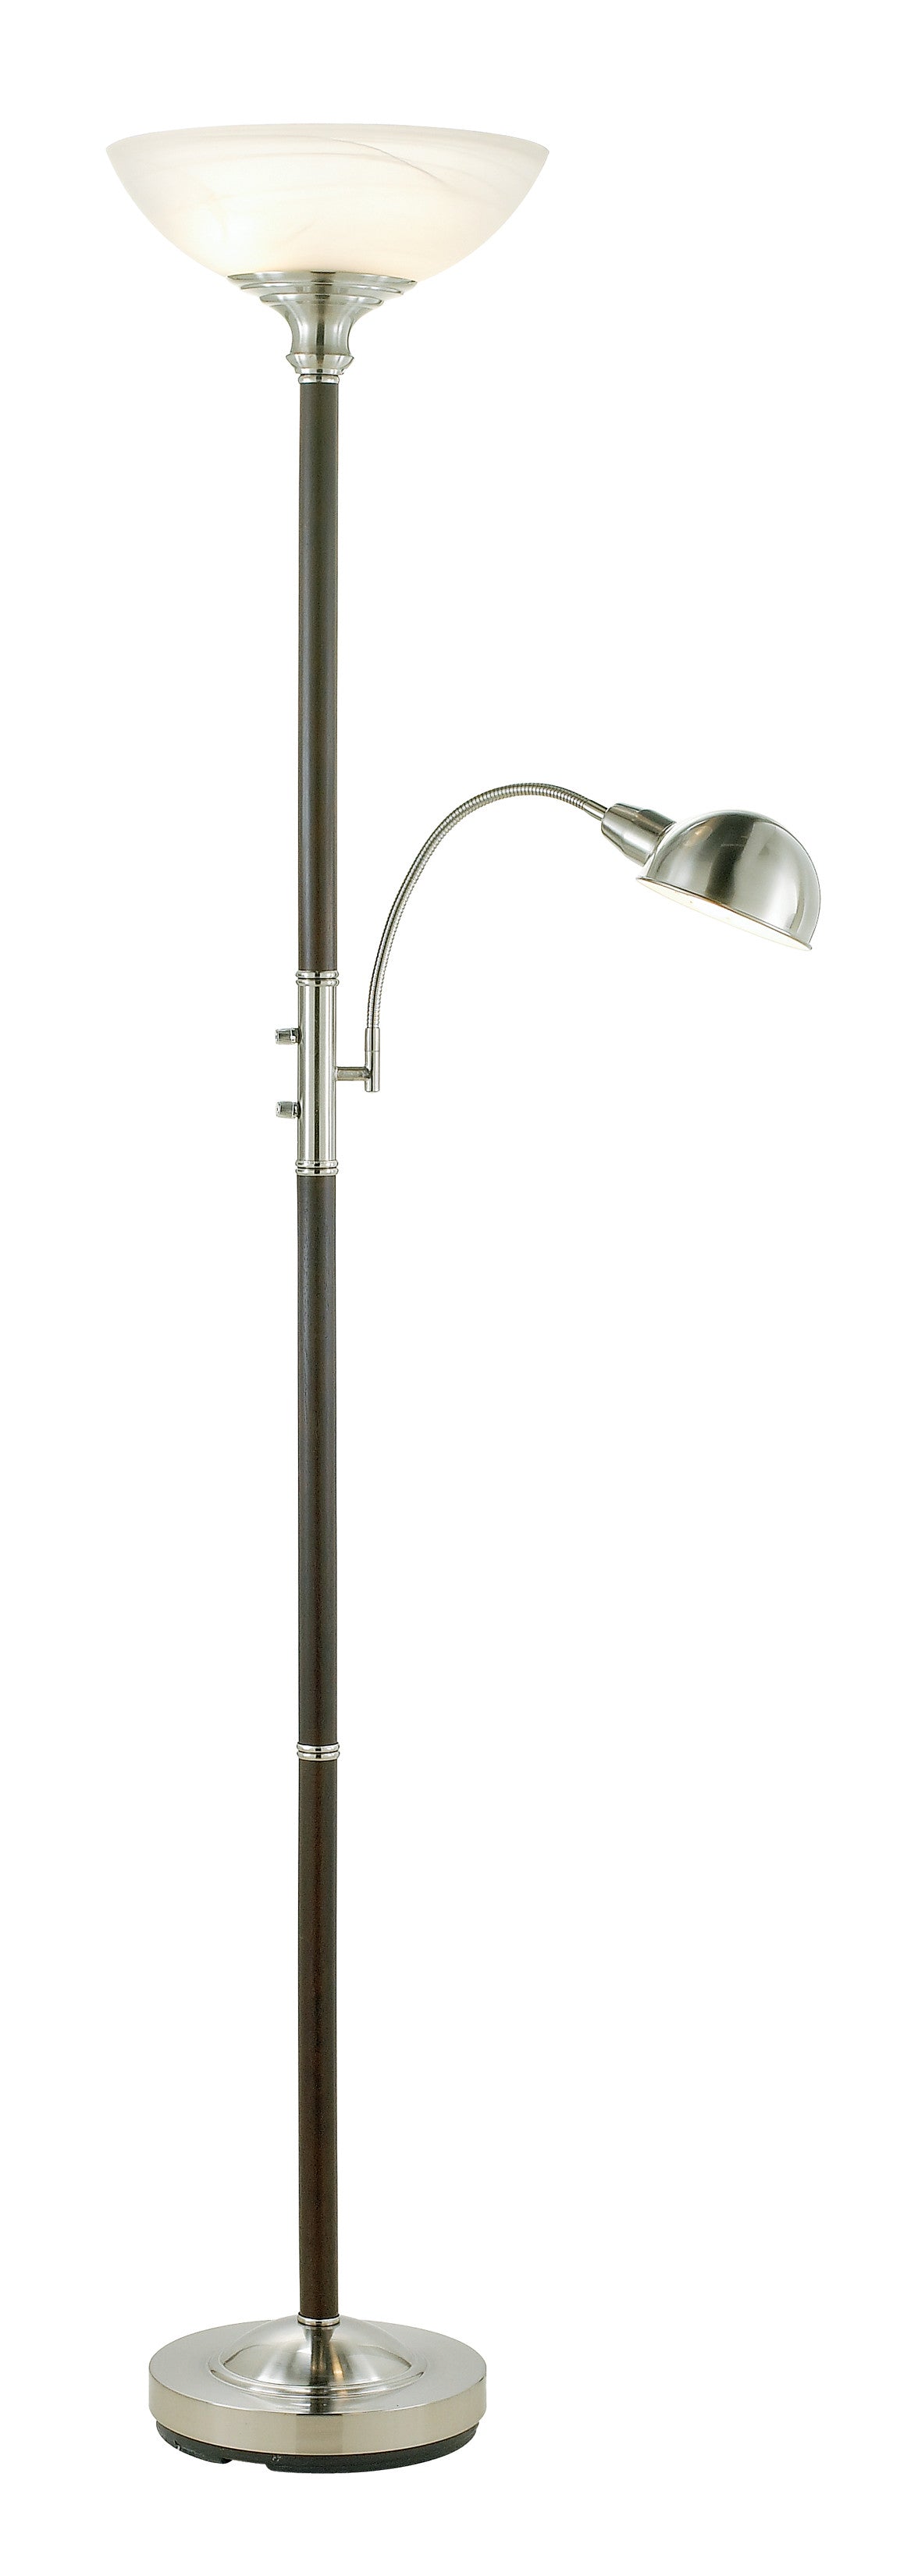 Two Light Combo Floor Lamp Wood Brushed Steel Torchiere With Frosted Glass Dome Shade And Reading Light With Brushed Steel Dome Shade